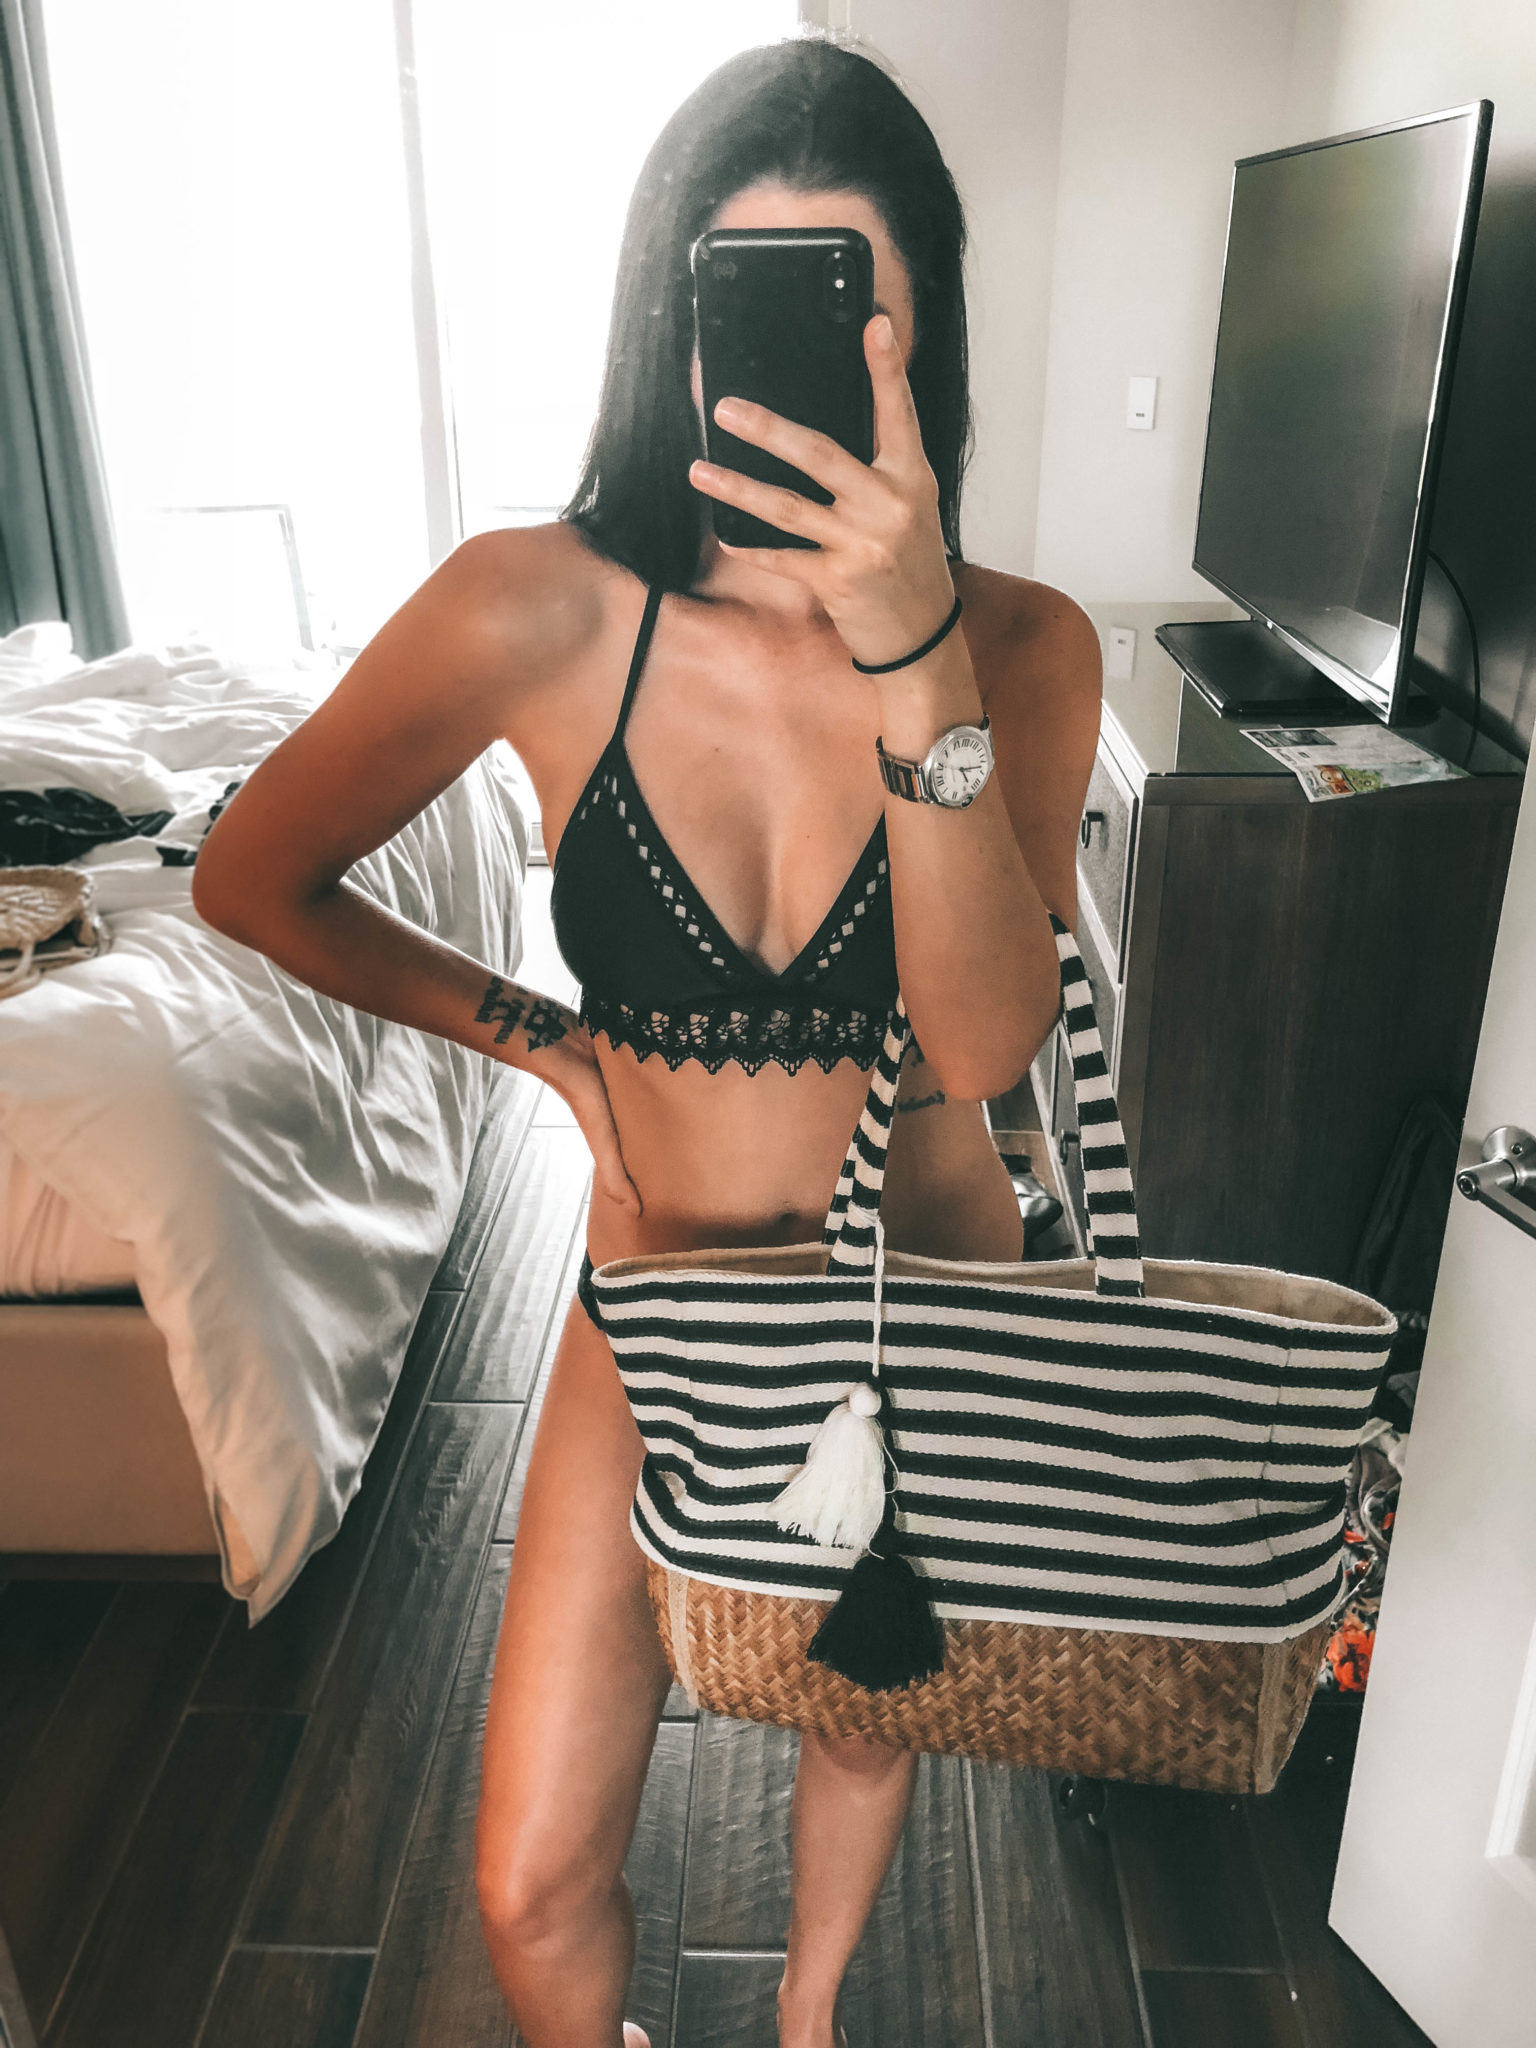 how to look cute yet comfortable for a beach vacation. | Resort Wear for Fall | What to wear to the beach | Black lace bikini | Target Bikini || Dressed to Kill #fashion #style #womensoutfit #womensfashion #bikini #resortwear #summerstyle #beachoutfit #fallfashion #dtkaustin | Beach Fashion: How to Look Put Together featured by popular Austin fashion blogger Dressed to Kill